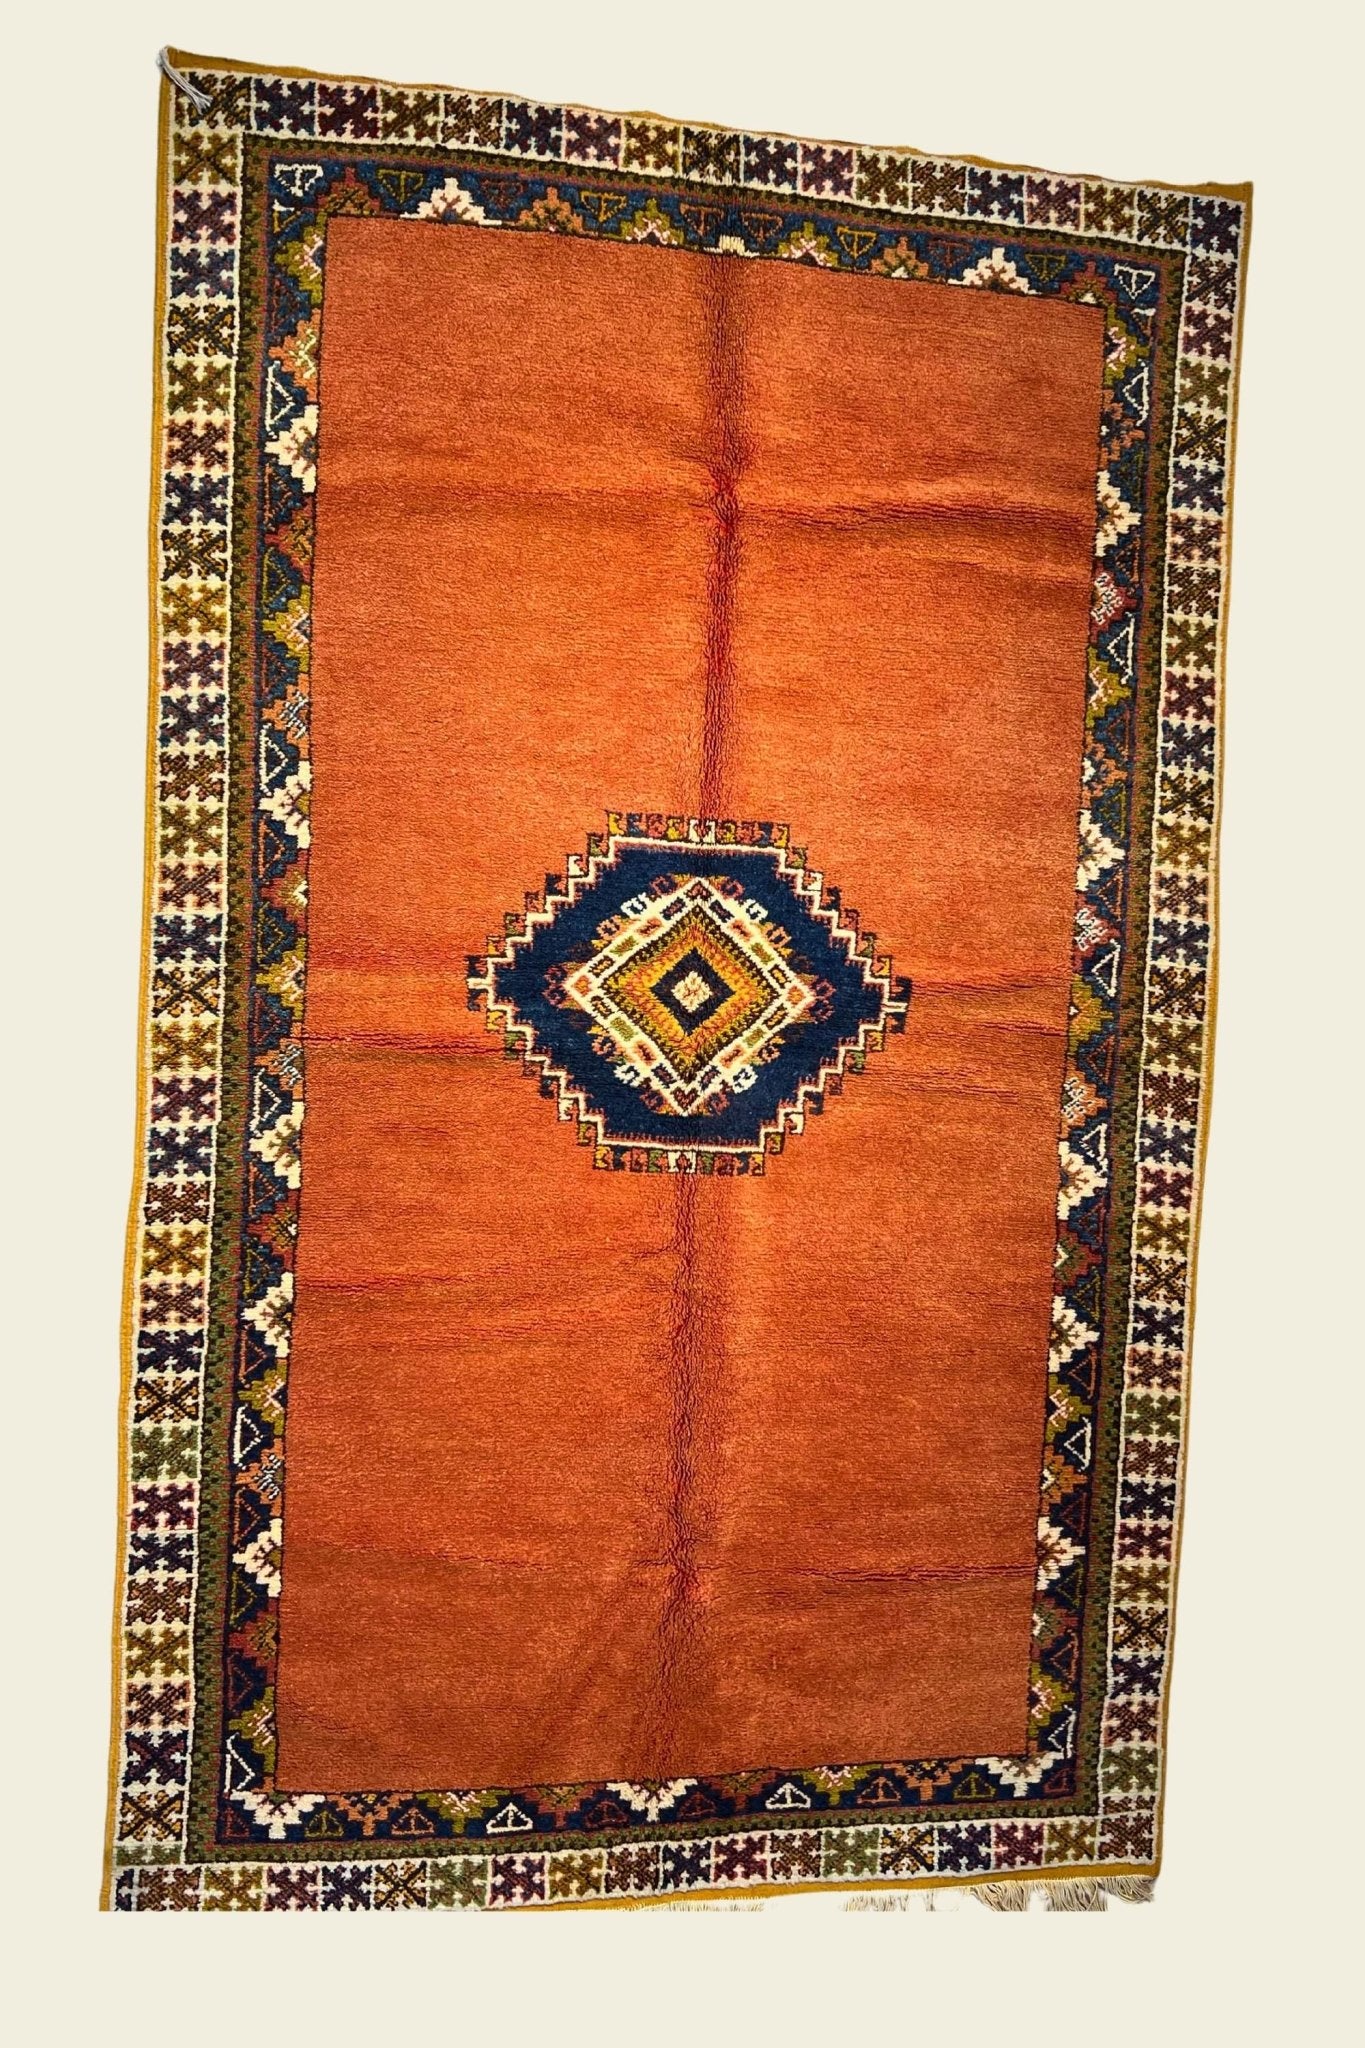 Moroccan area rug from Tazenakht, Wool and Thread, 5'3" x 8'6" Or 160 cm x 260 cm - Dar Bouchaib Marrakech